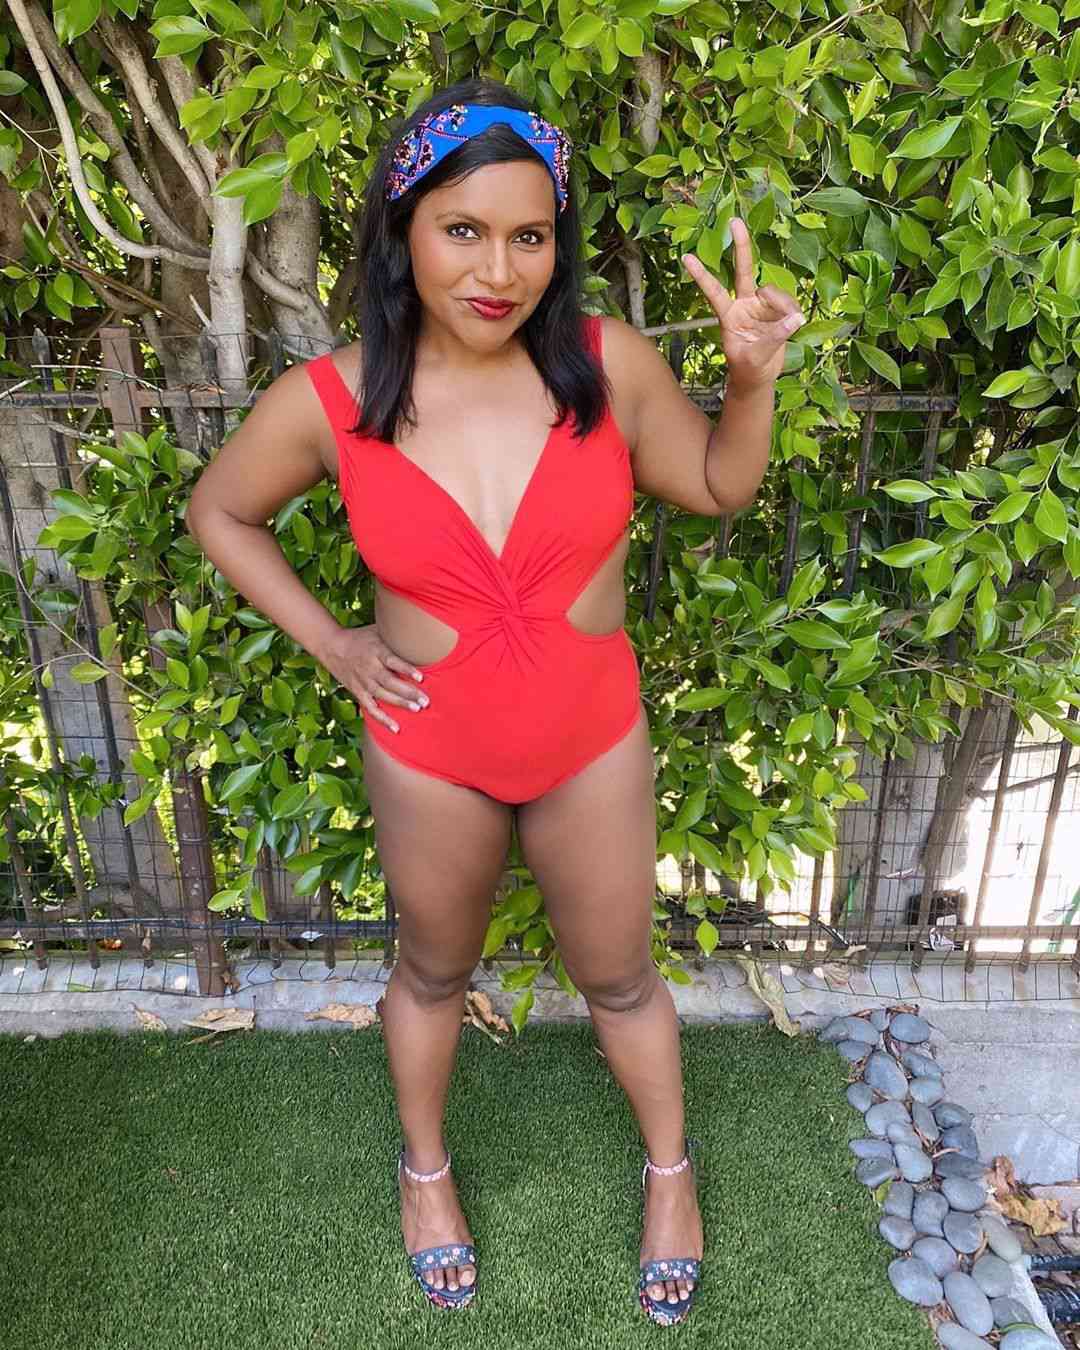 mindy-kaling-says-goodbye-to-summer-2020-with-an-instagram-swimsuit-photoshoot